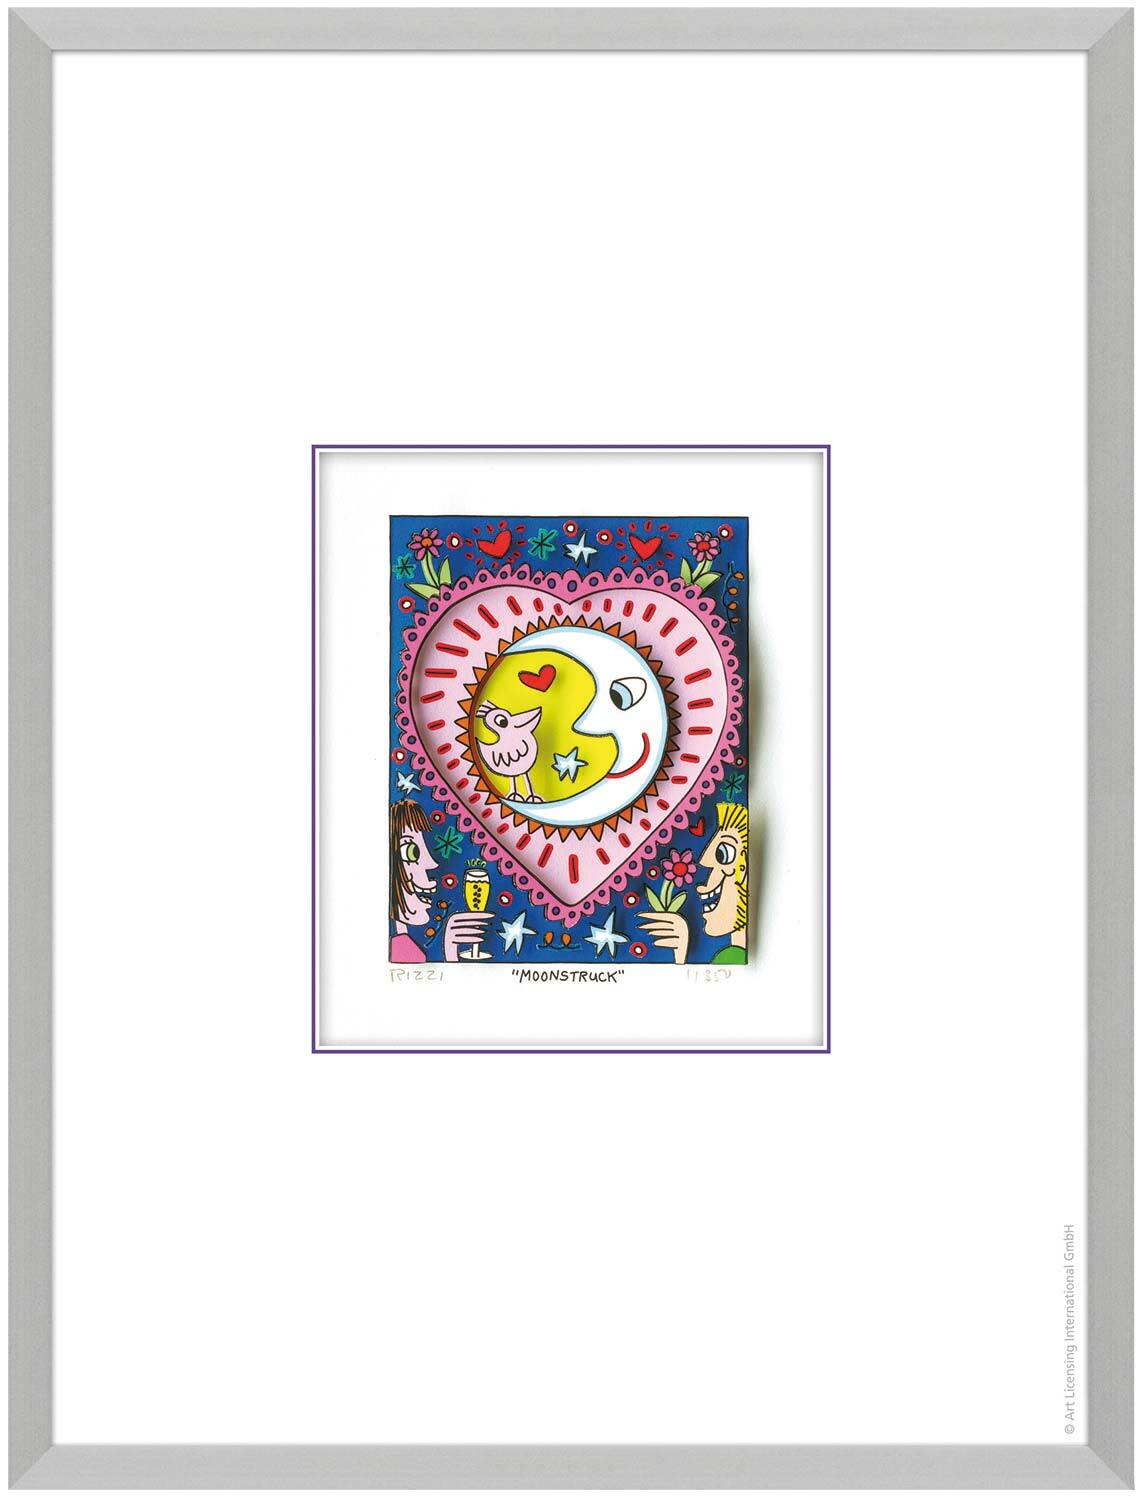 3D Picture "Moonstruck", framed by James Rizzi